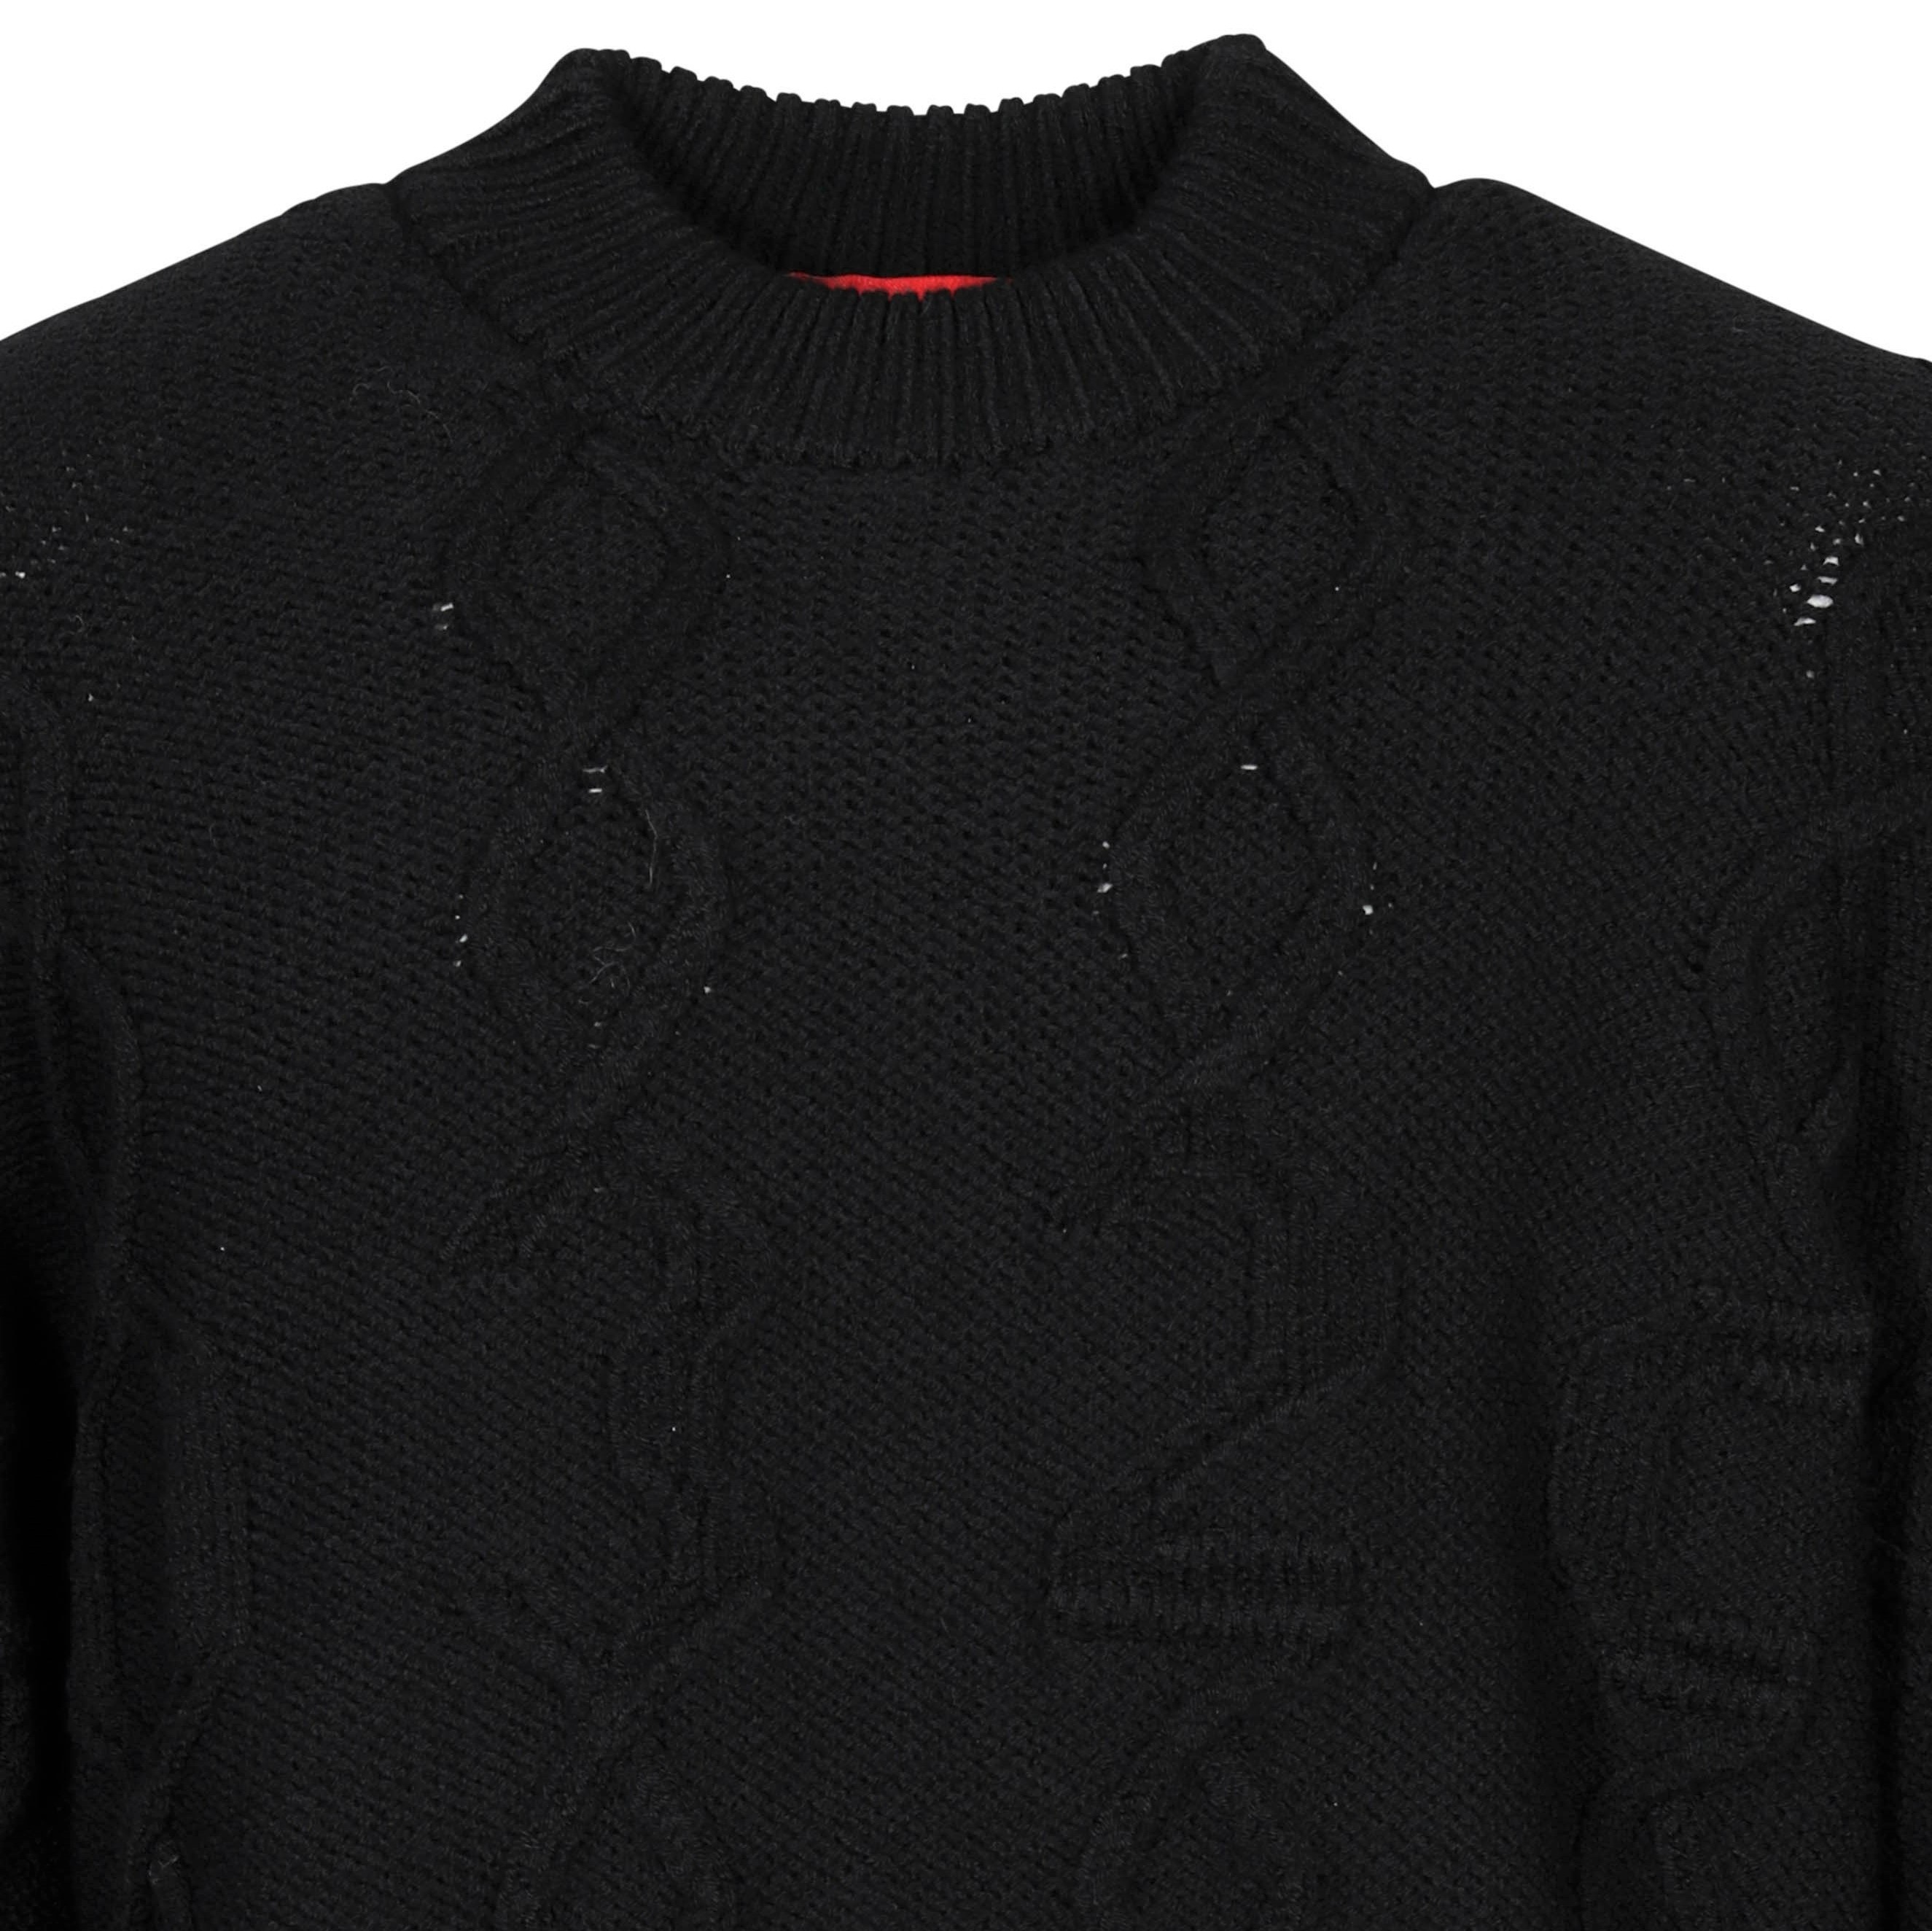 032c The Highland Knit Pullover in Black XS